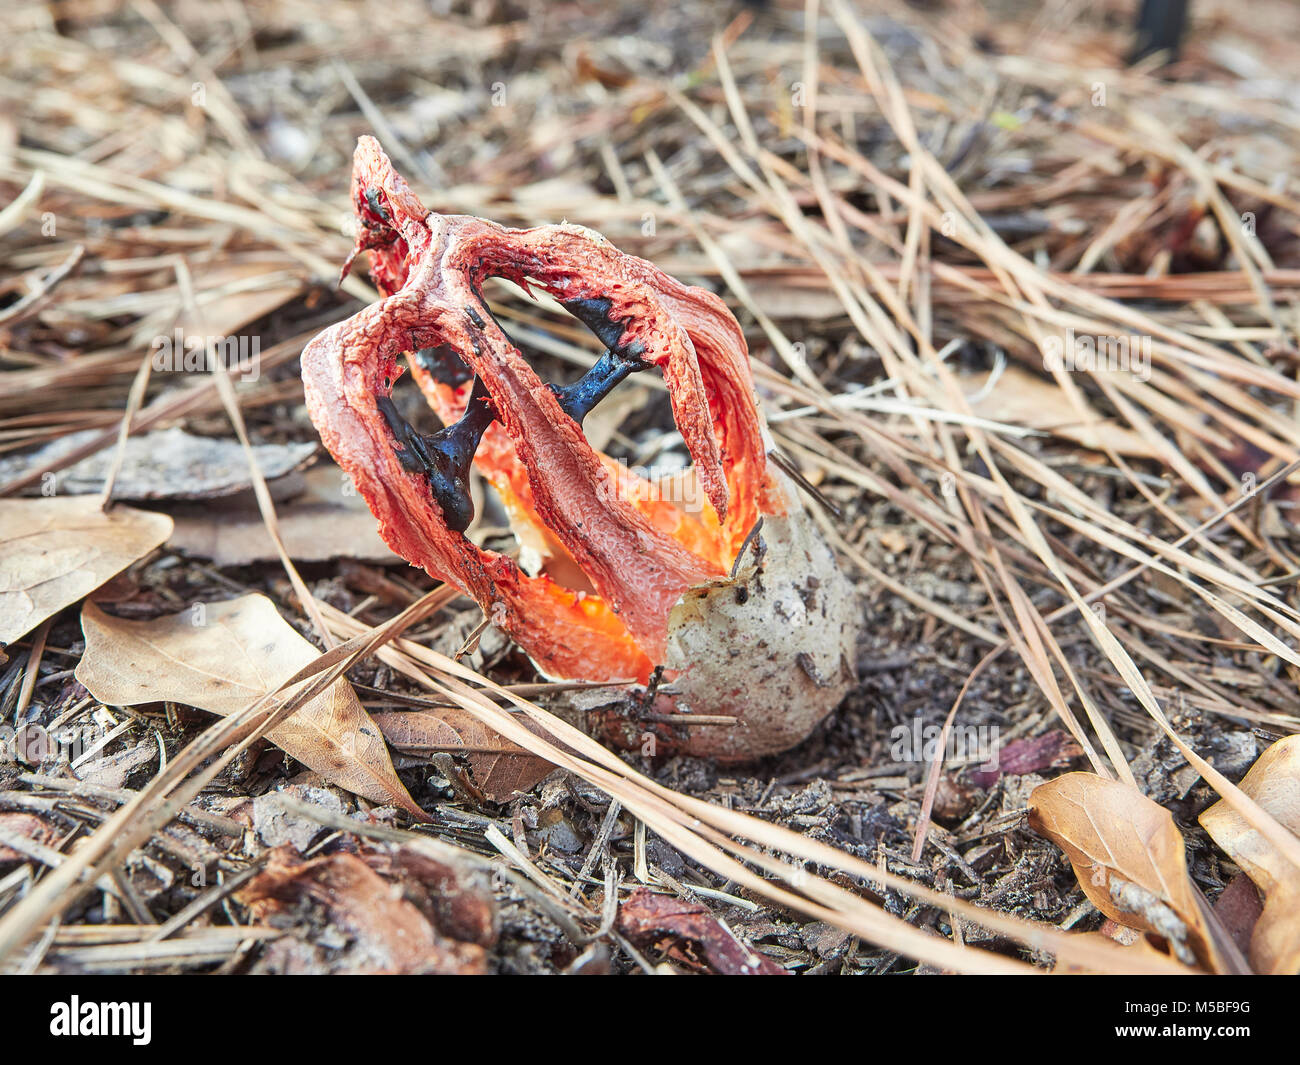 Clathrus Ruber, cage stinkhorn, or basket stinkhorn fungus growing on forest floor, Montgomery, Alabama USA. Stock Photo